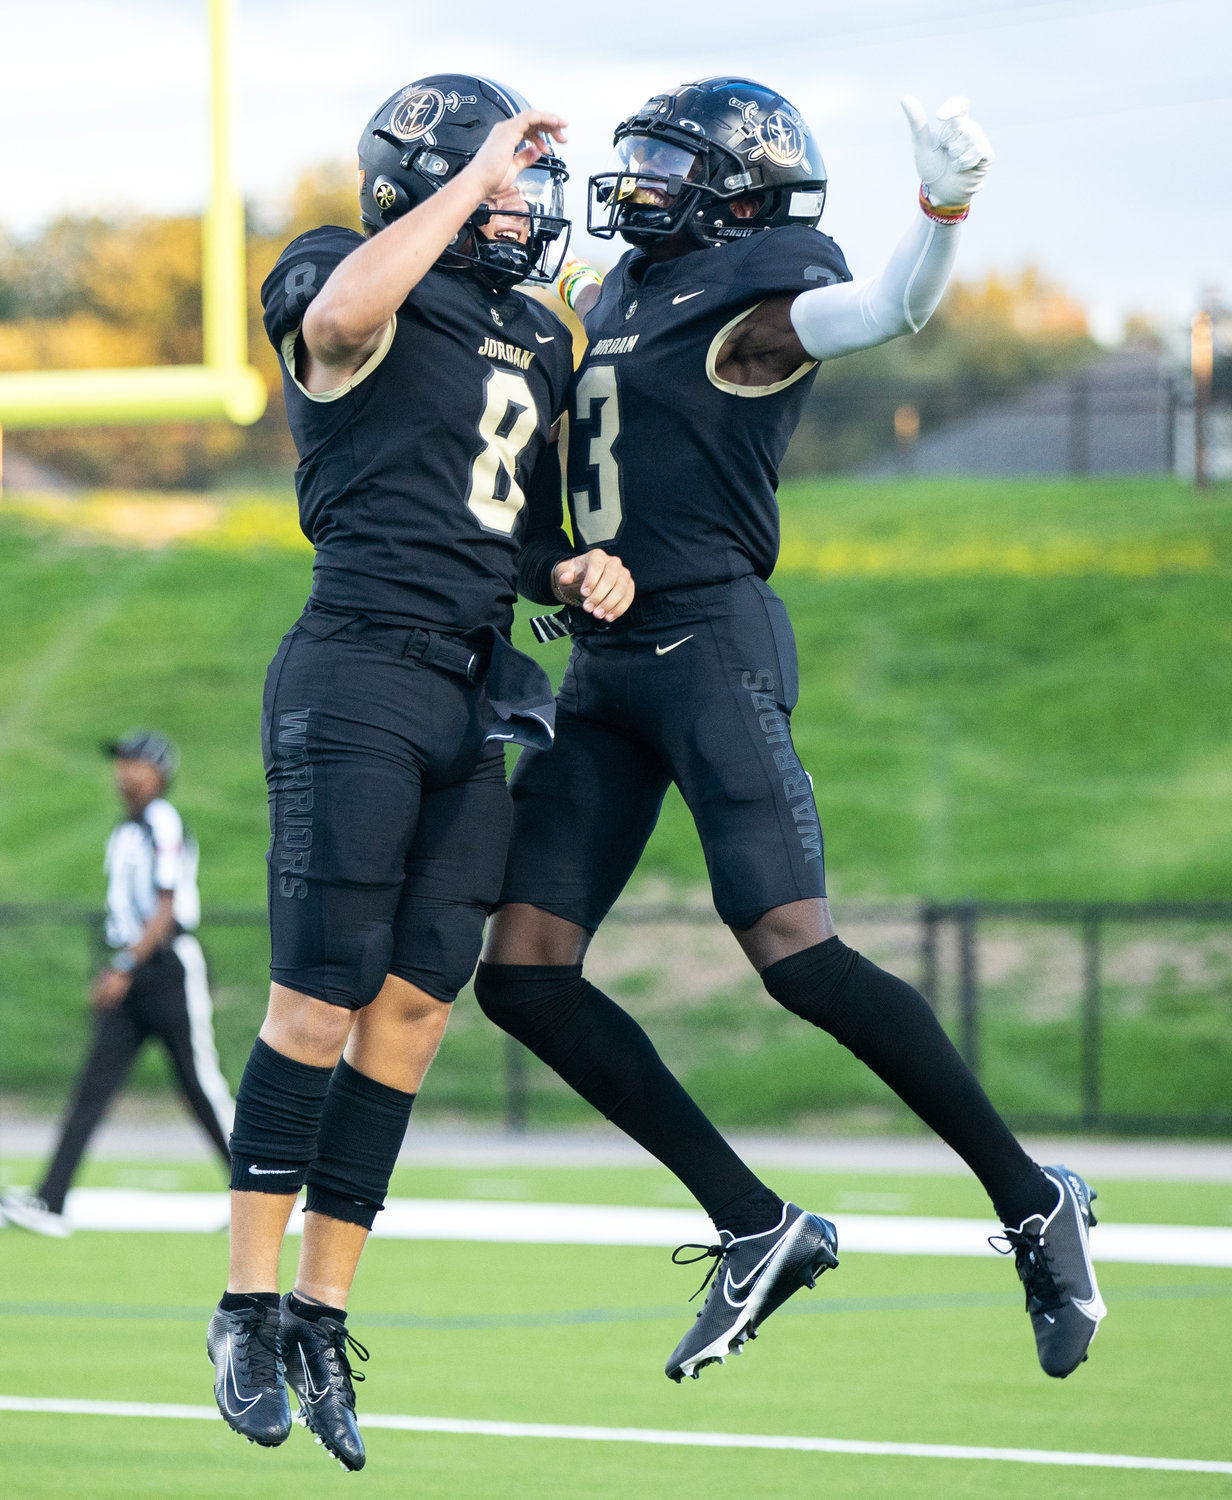 Jordan quarterback Colin Willetts and wide receiver Andrew Marsh celebrate after scoring a touchdown during Saturday’s game between Jordan and Aldine Davis.